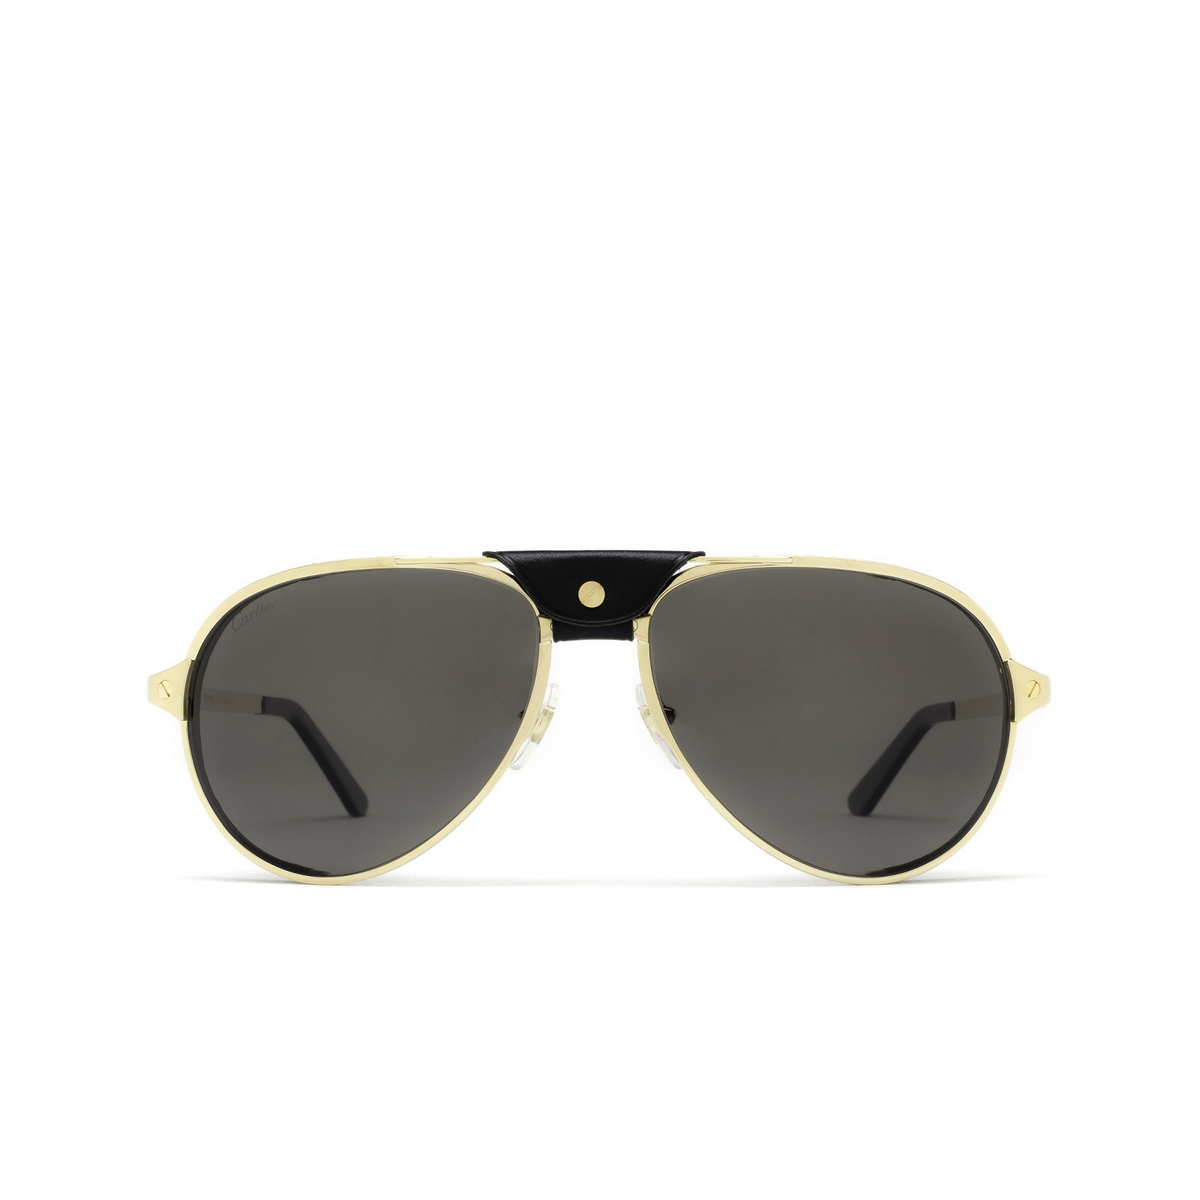 Cartier® Aviator Sunglasses: CT0296S color Gold 001 - front view.